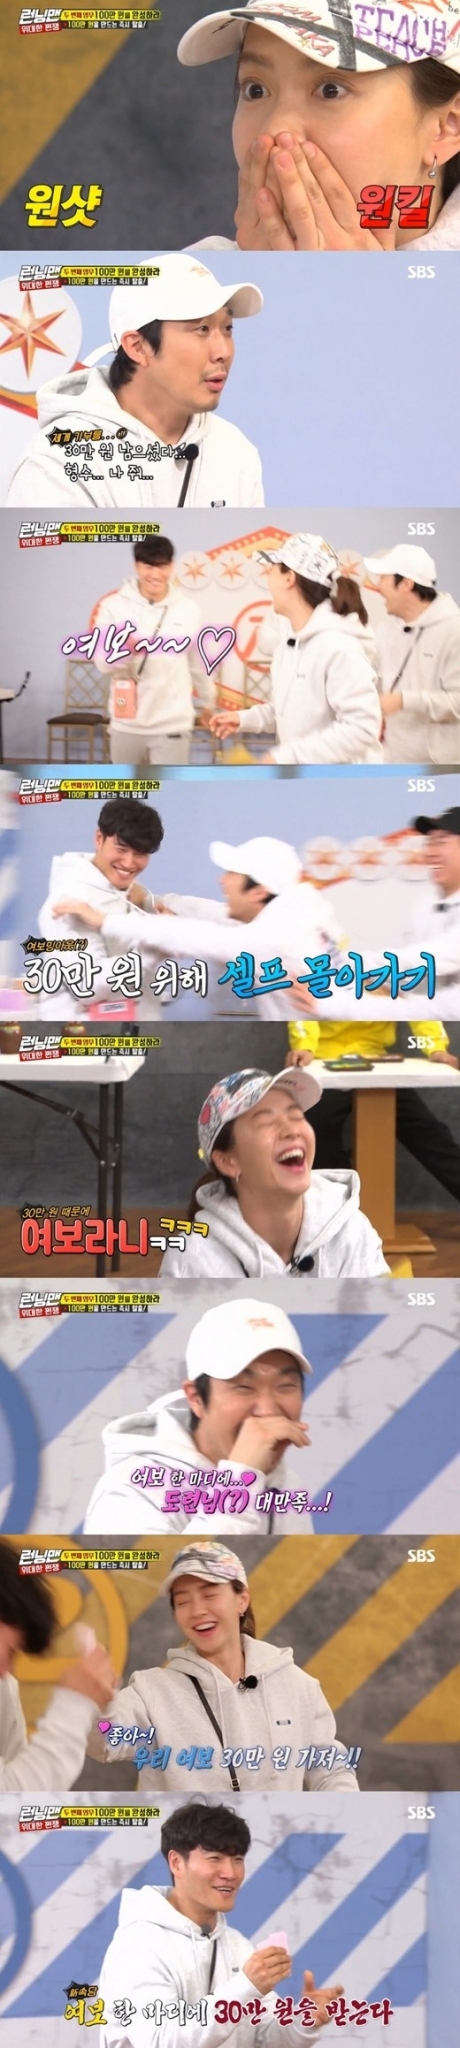 Song Ji-hyo was laughingly pleased to drive a couple with Kim Jong-kook of Haha.Haha said, I push forward the fortress (with Kim Jong-kook) to join Song Ji-hyo as a team.Song Ji-hyo also said, Do not be good to me.Song Ji-hyo and Haha increasingly naturally called each other masters and brother-in-laws; the two boasted a naturally subdued love line even in front of Kim Jong-kook.Kim Jong-kook called Song Ji-hyo a honey, although he was a champion for the mission.Haha, who was playing with Song Ji-hyo as his sister-in-law, was also embarrassed. Song Ji-hyo was also told to have 300,000 won.Kim Jong-kook did not budge to drive a couple with Song Ji-hyo such as Haha and Yoo Jae-Suk.However, on this day, he called himself Song Ji-hyo as a honey and showed an active appearance.Song Ji-hyo also responded with a bright smile to Kim Jong-kooks changed appearance.The production team of Running Man said that it follows the atmosphere of the filming scene without any directing, especially for the love line.Kim Jong-kook and Song Ji-hyos love line are also attracting the attention of many people as the emotional lines accumulated gradually explode.